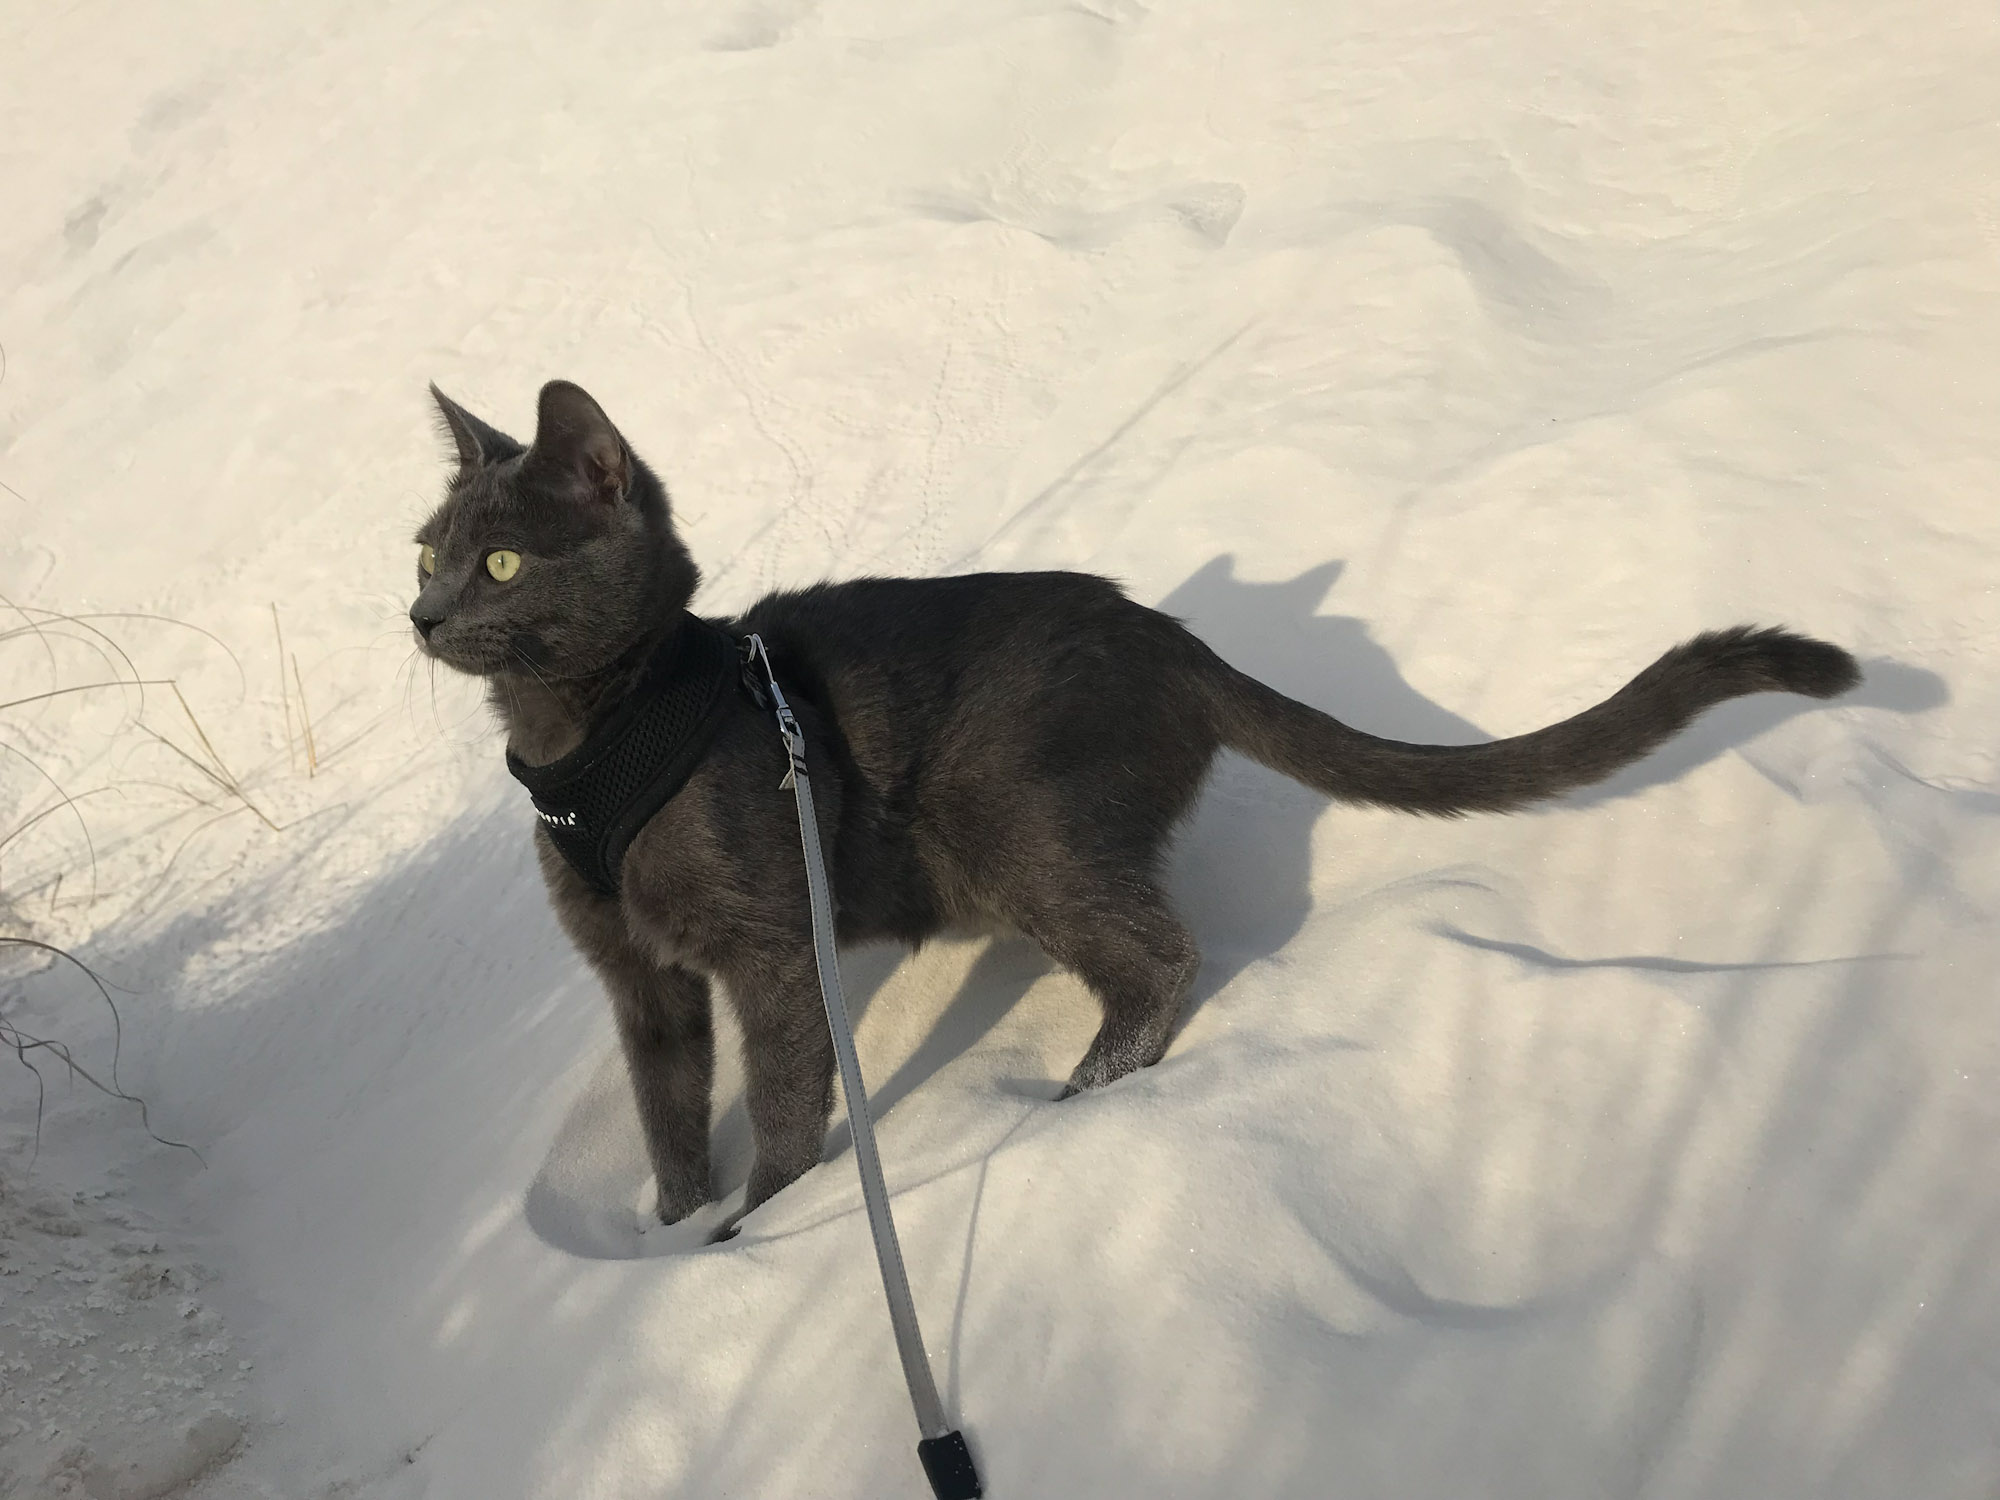 gray cat in harness on sand dune